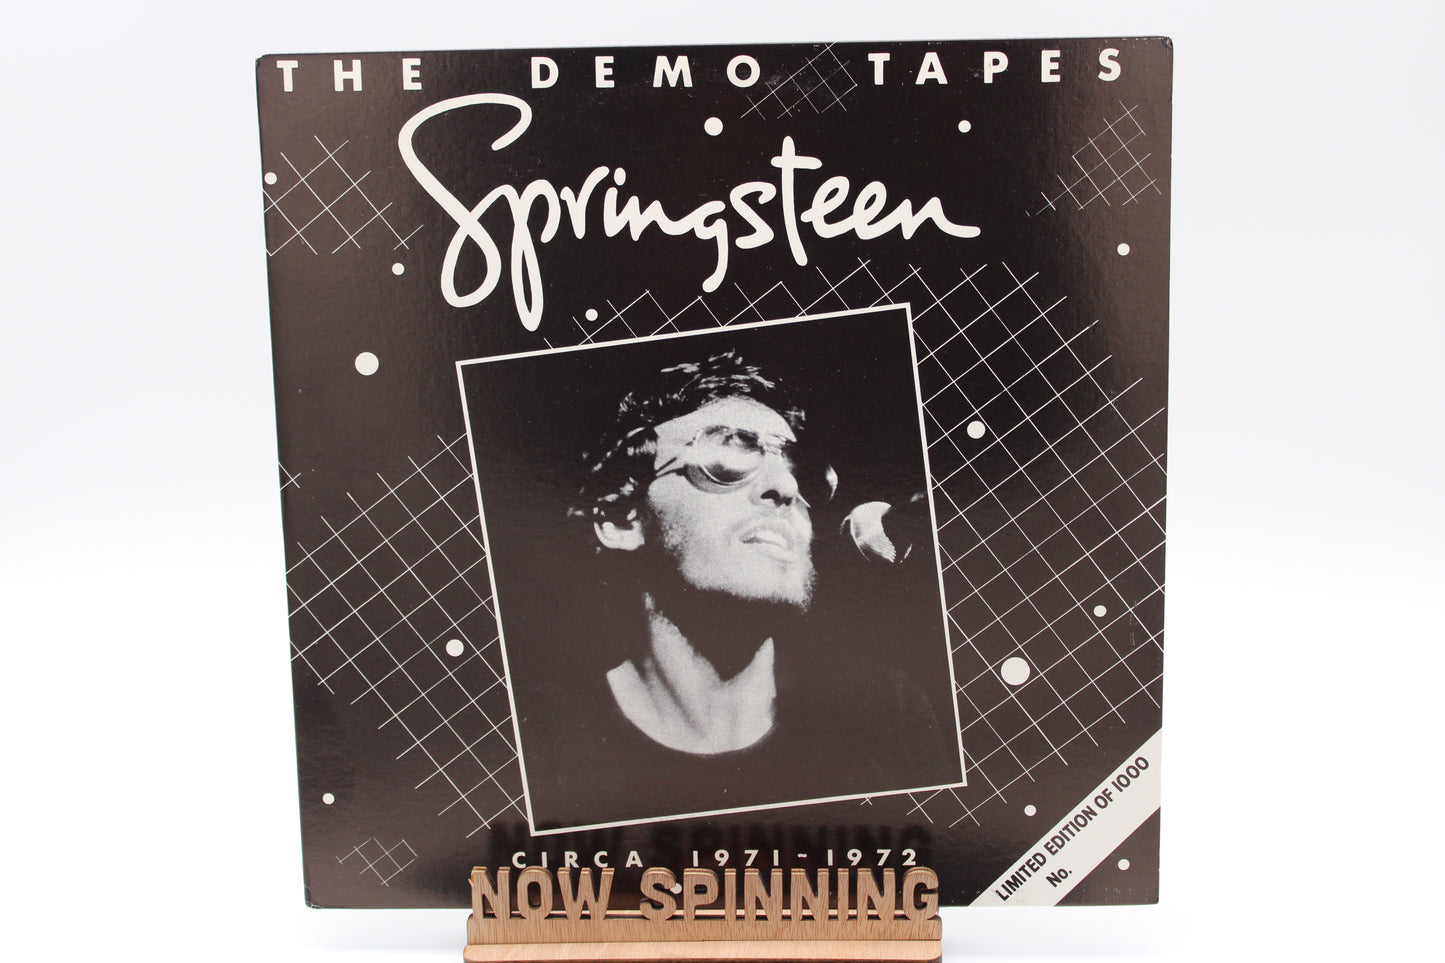 Bruce Springsteen - The Demo Tapes Circa 1971-1972 Unofficial Vinyl - Red Labels - Near Mint